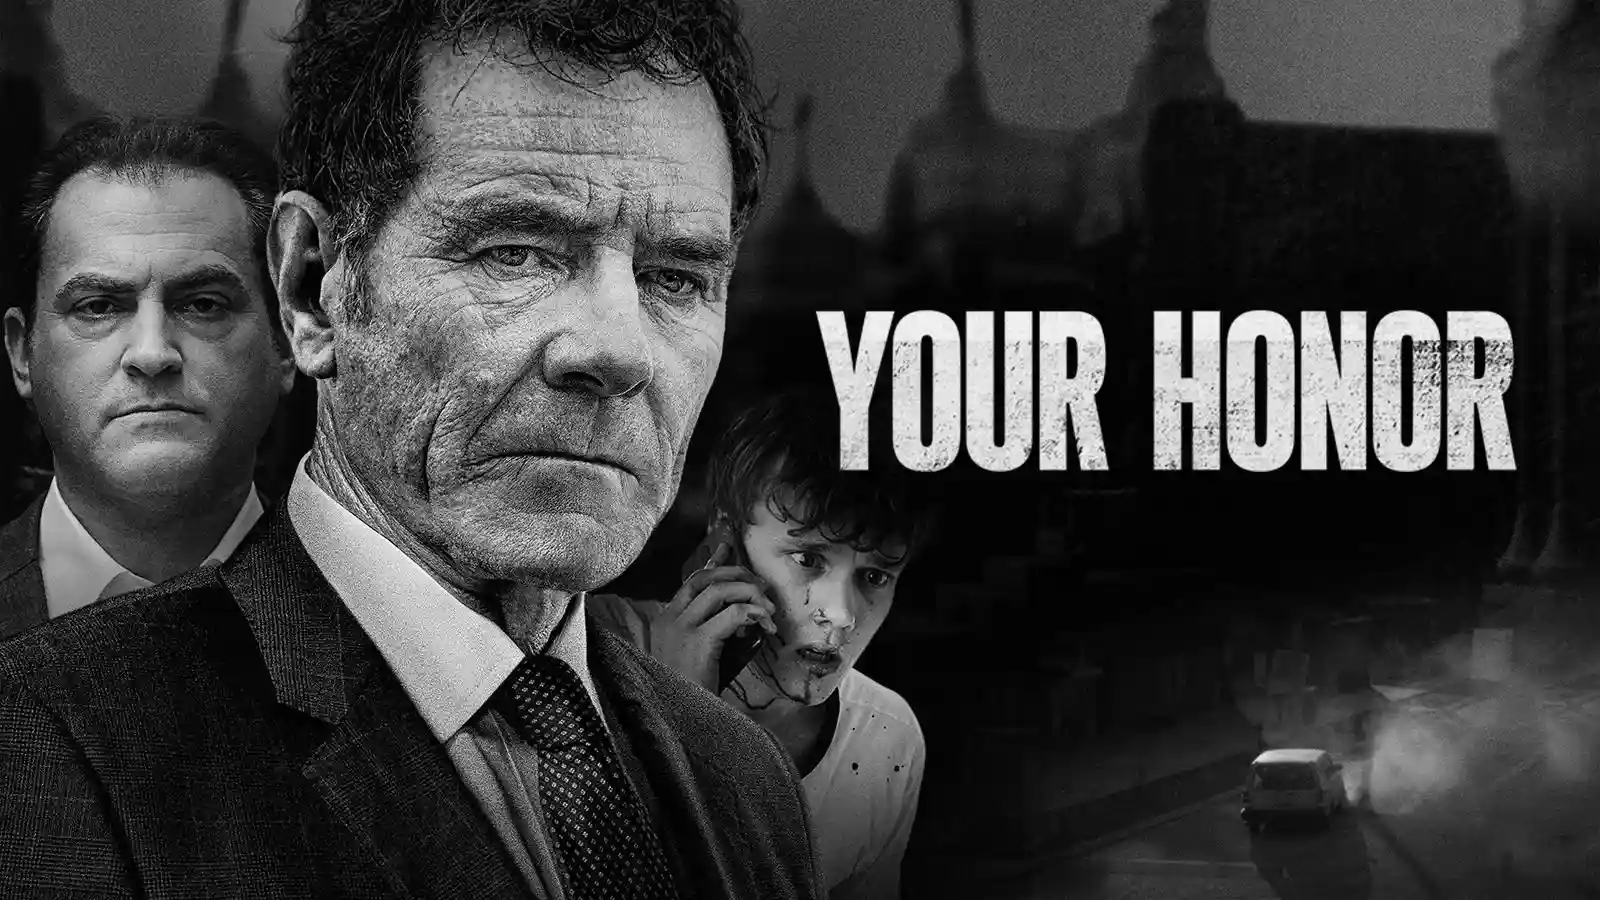 Your Honor season 2 is Streaming on Showtime now, A Bunch of Mixed Emotions